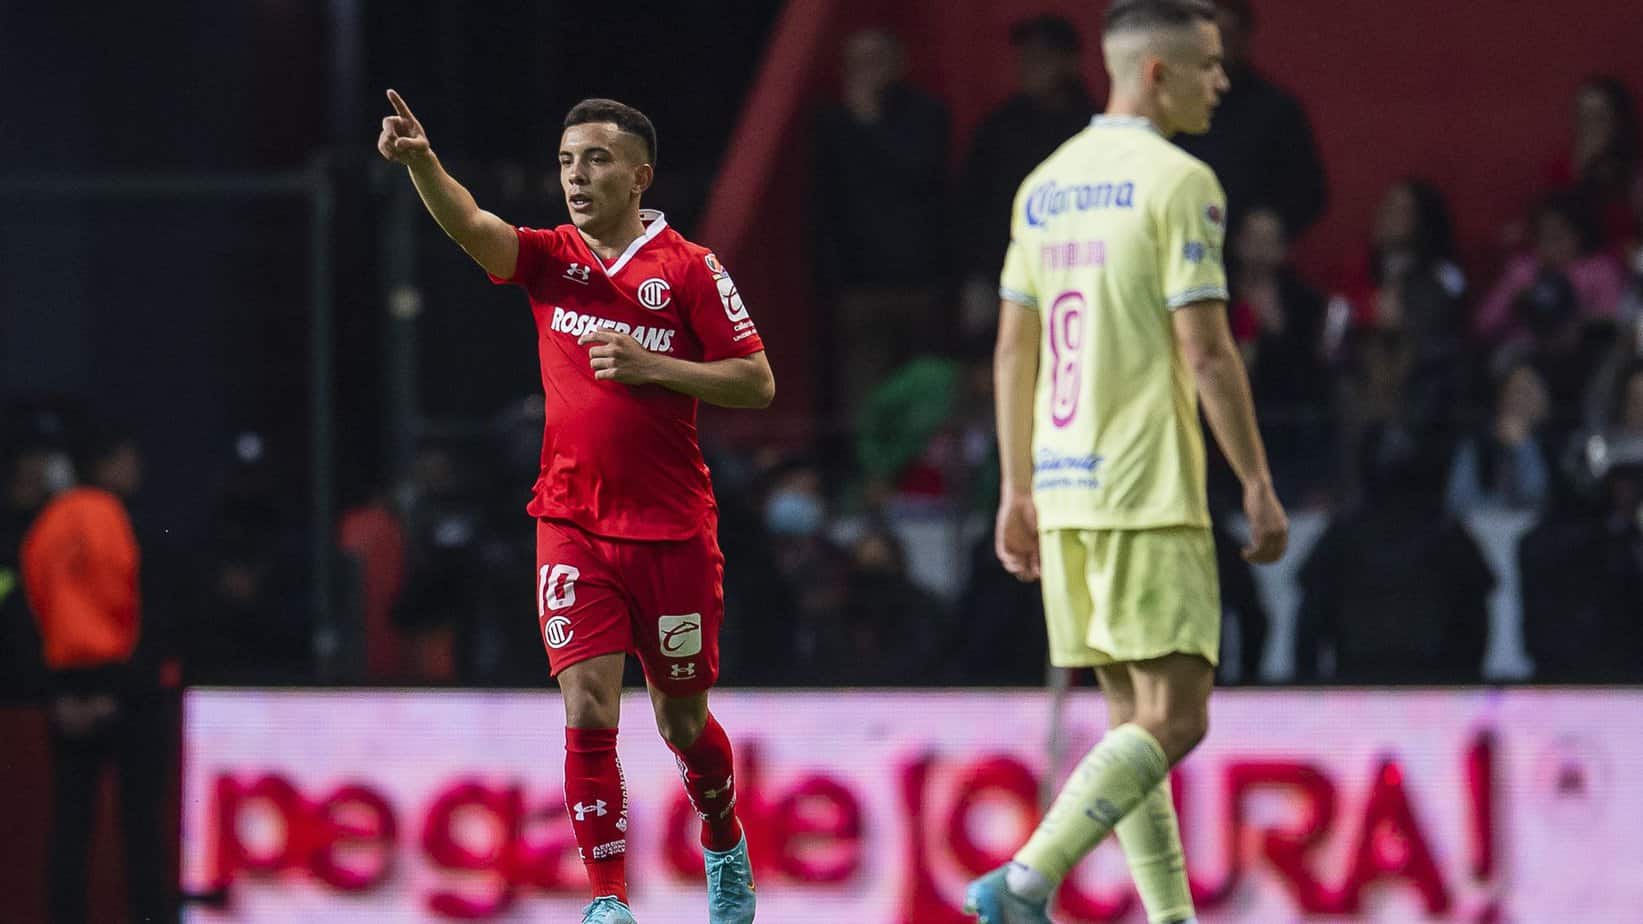 Toluca vs. América – Betting Odds and Free Pick